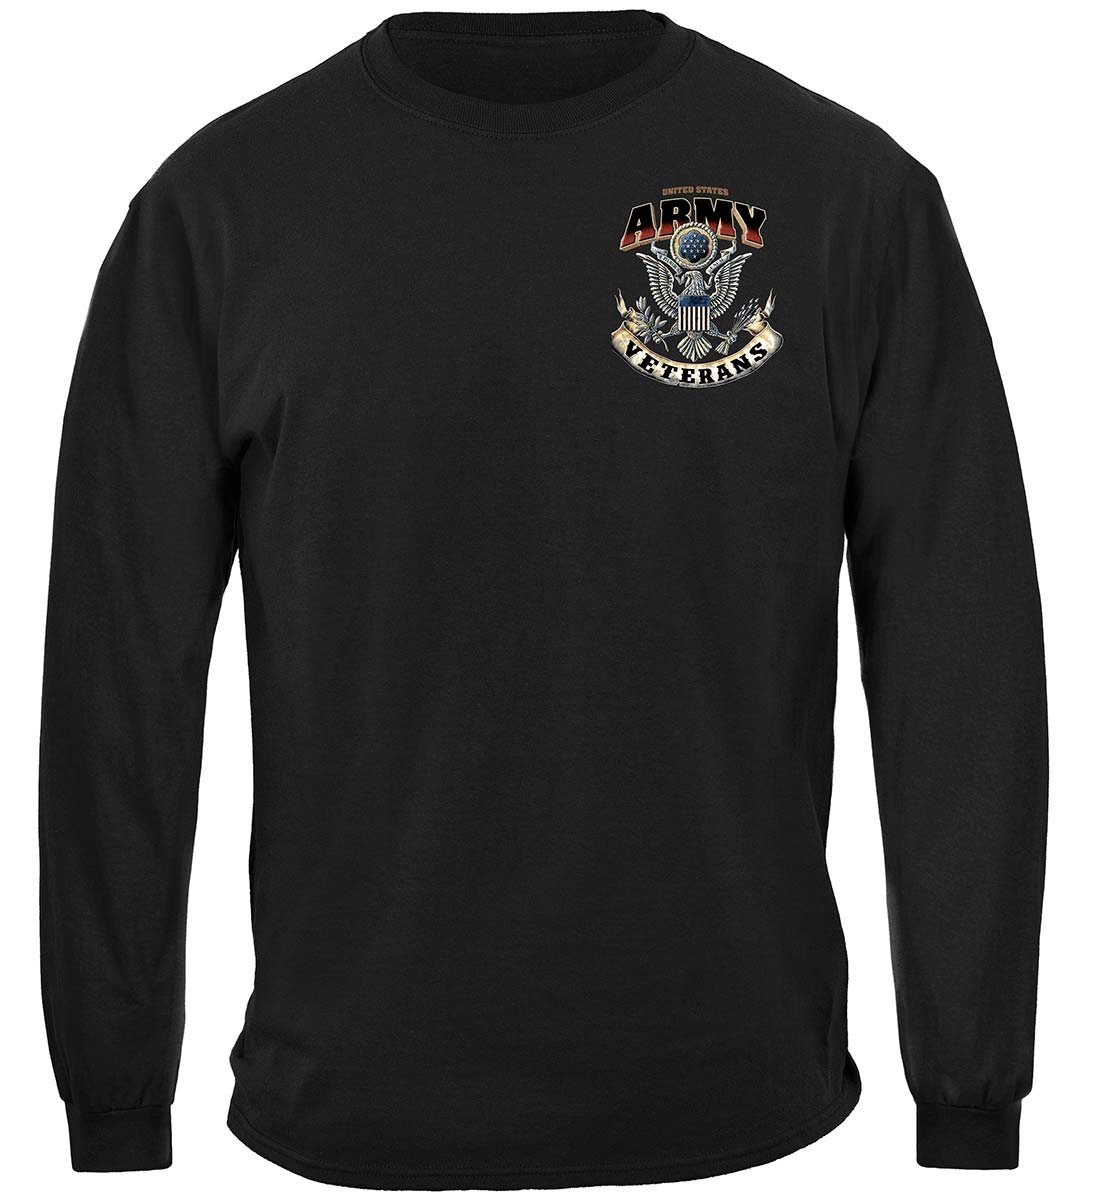 Army Proud To Have Served Premium T-Shirt